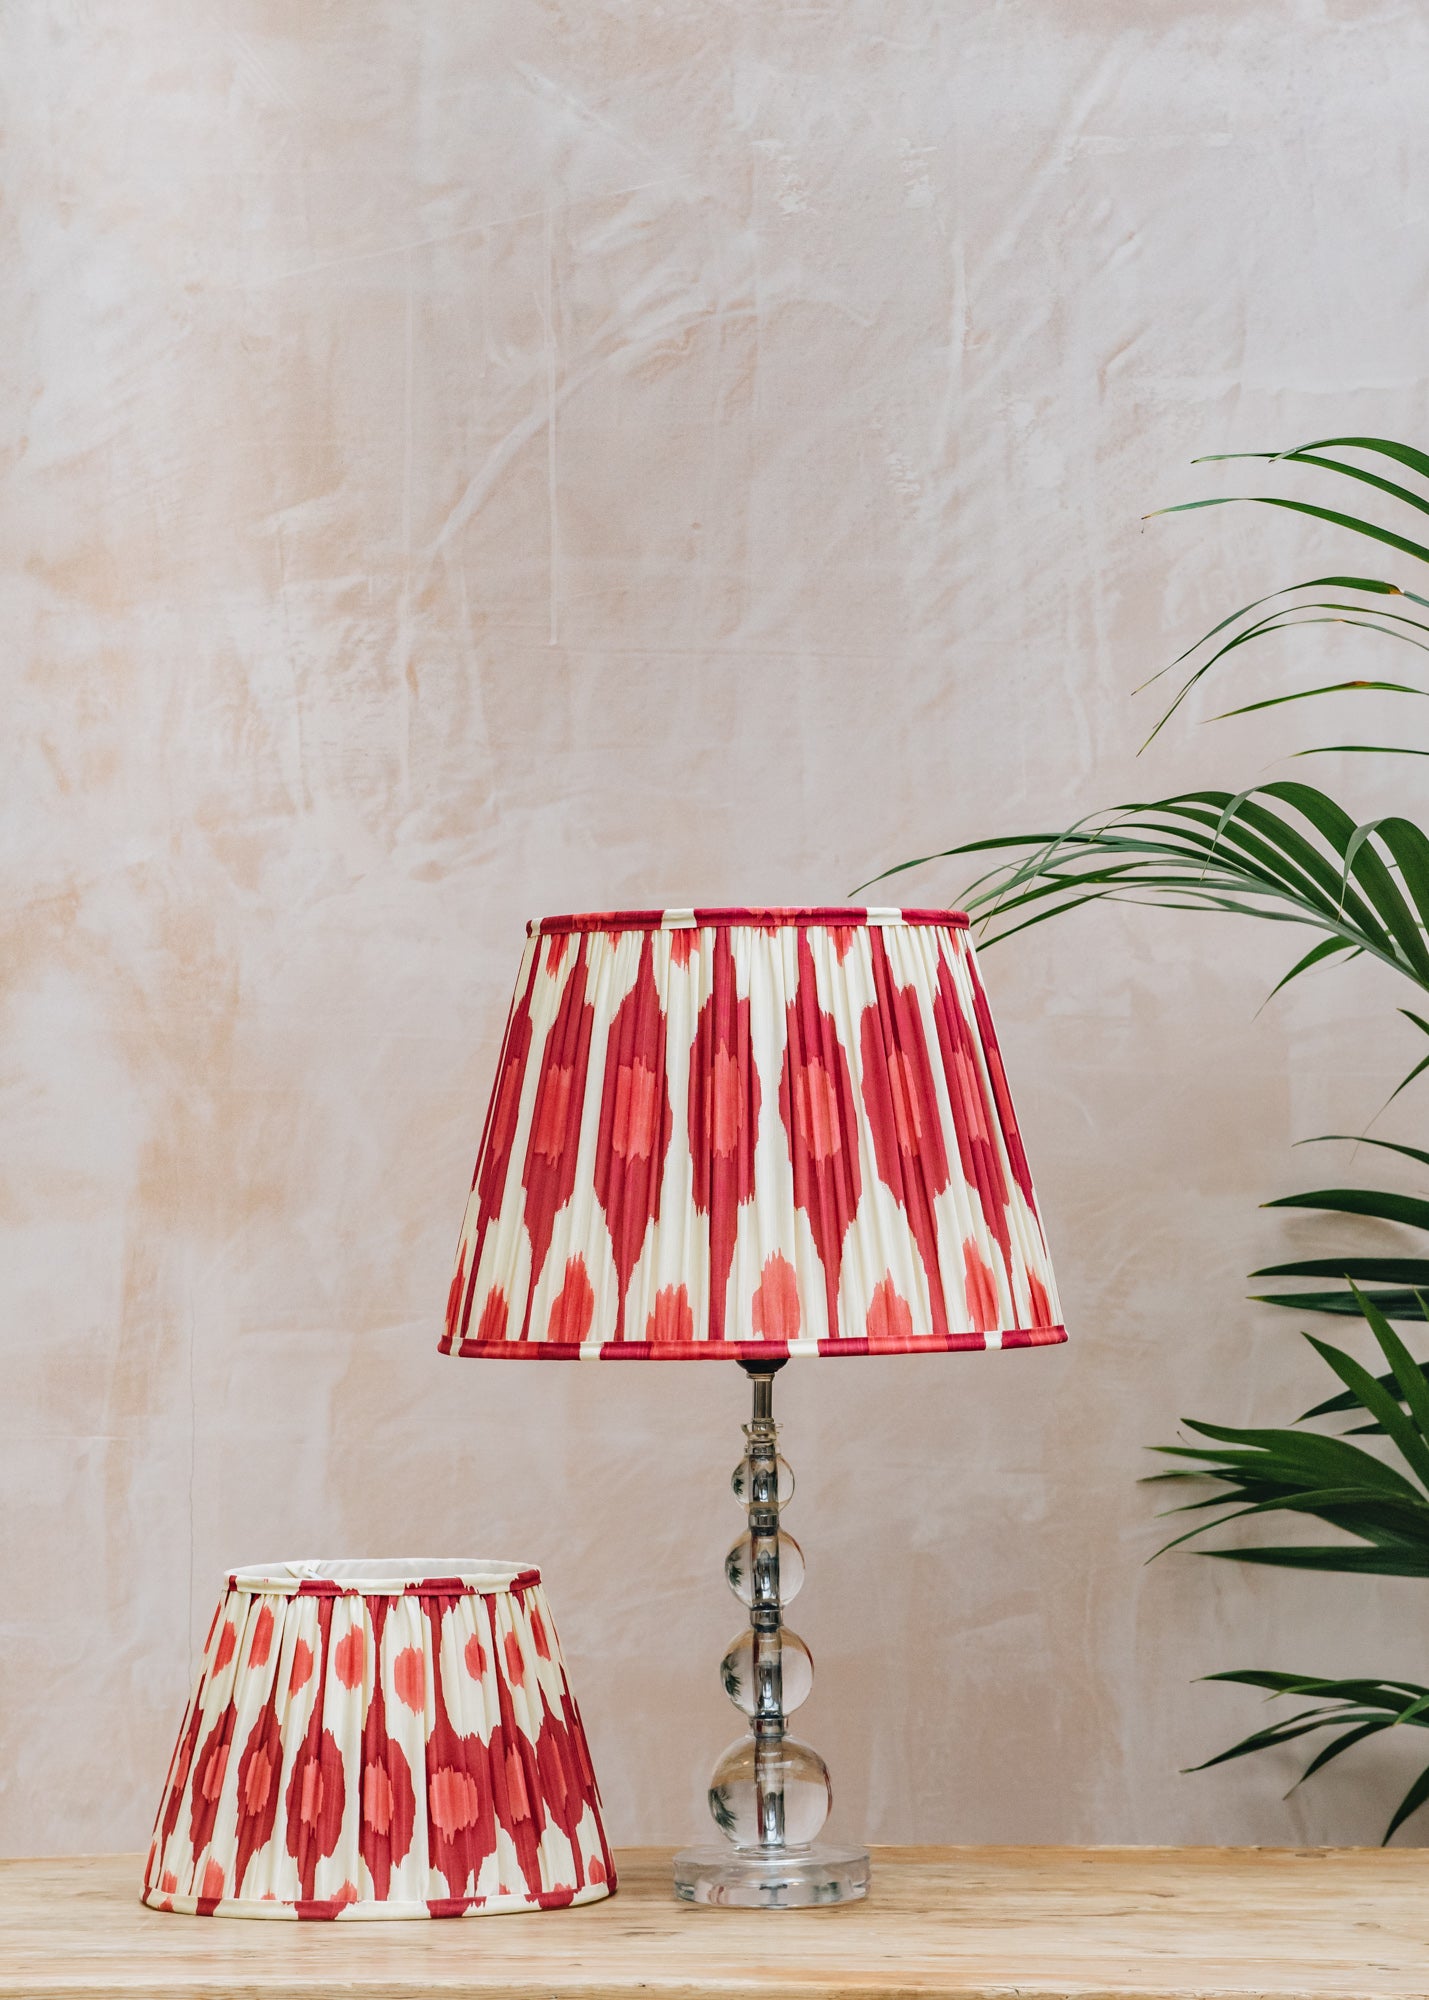 Empire Straight Shades in Egg & Spoon Ikat Berries